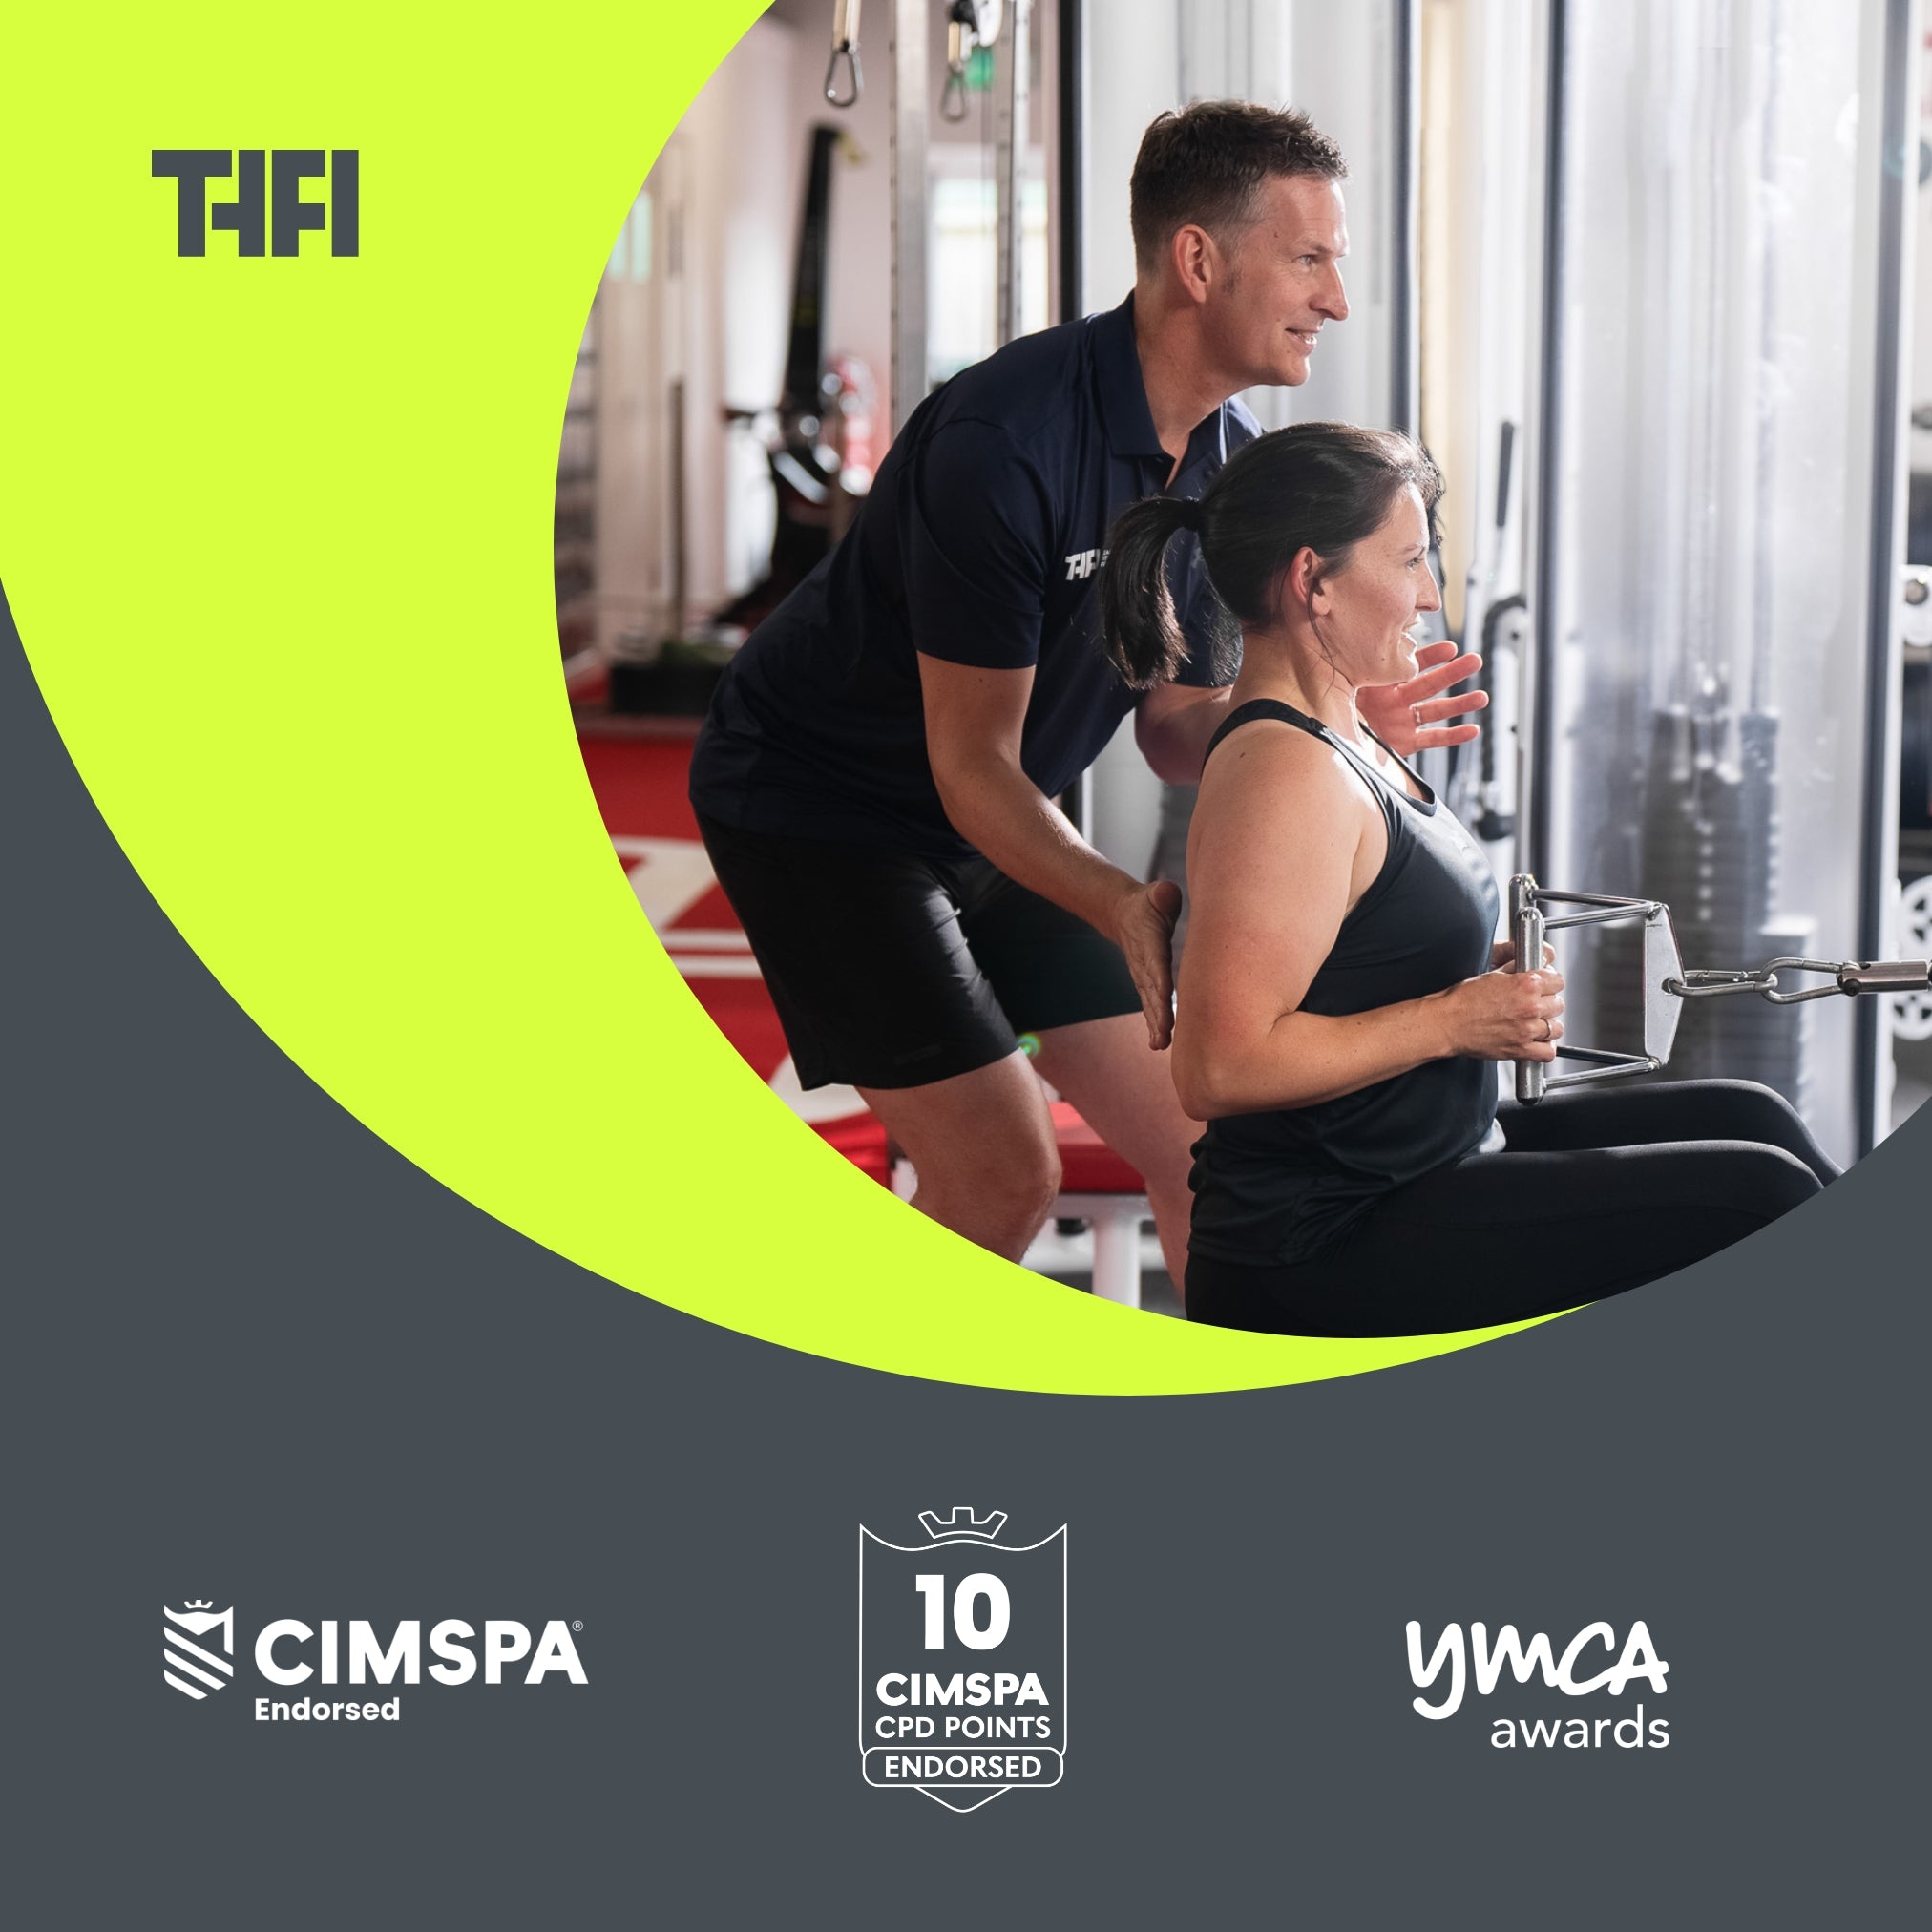 Level 3 Diploma in Gym Instructing and Personal Training - Advanced - The Health and Fitness Institute